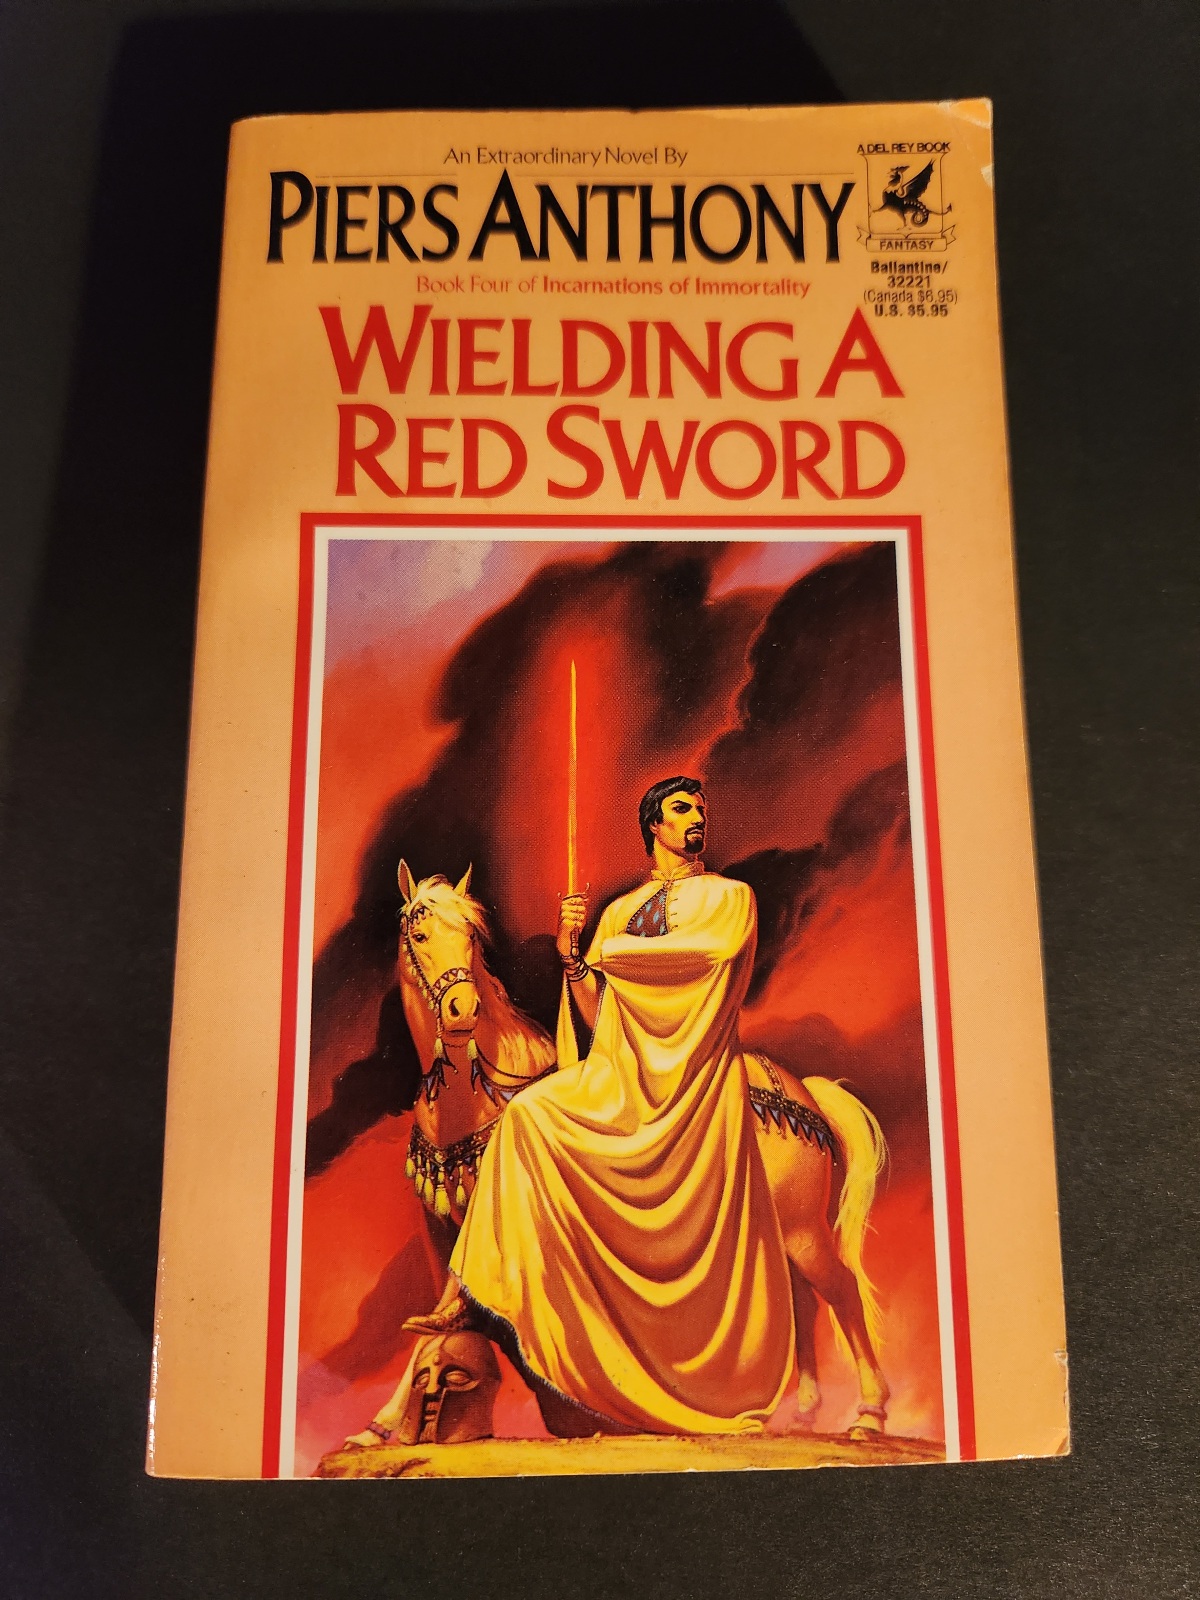 Wielding A Red Sword by Piers Anthony 1990